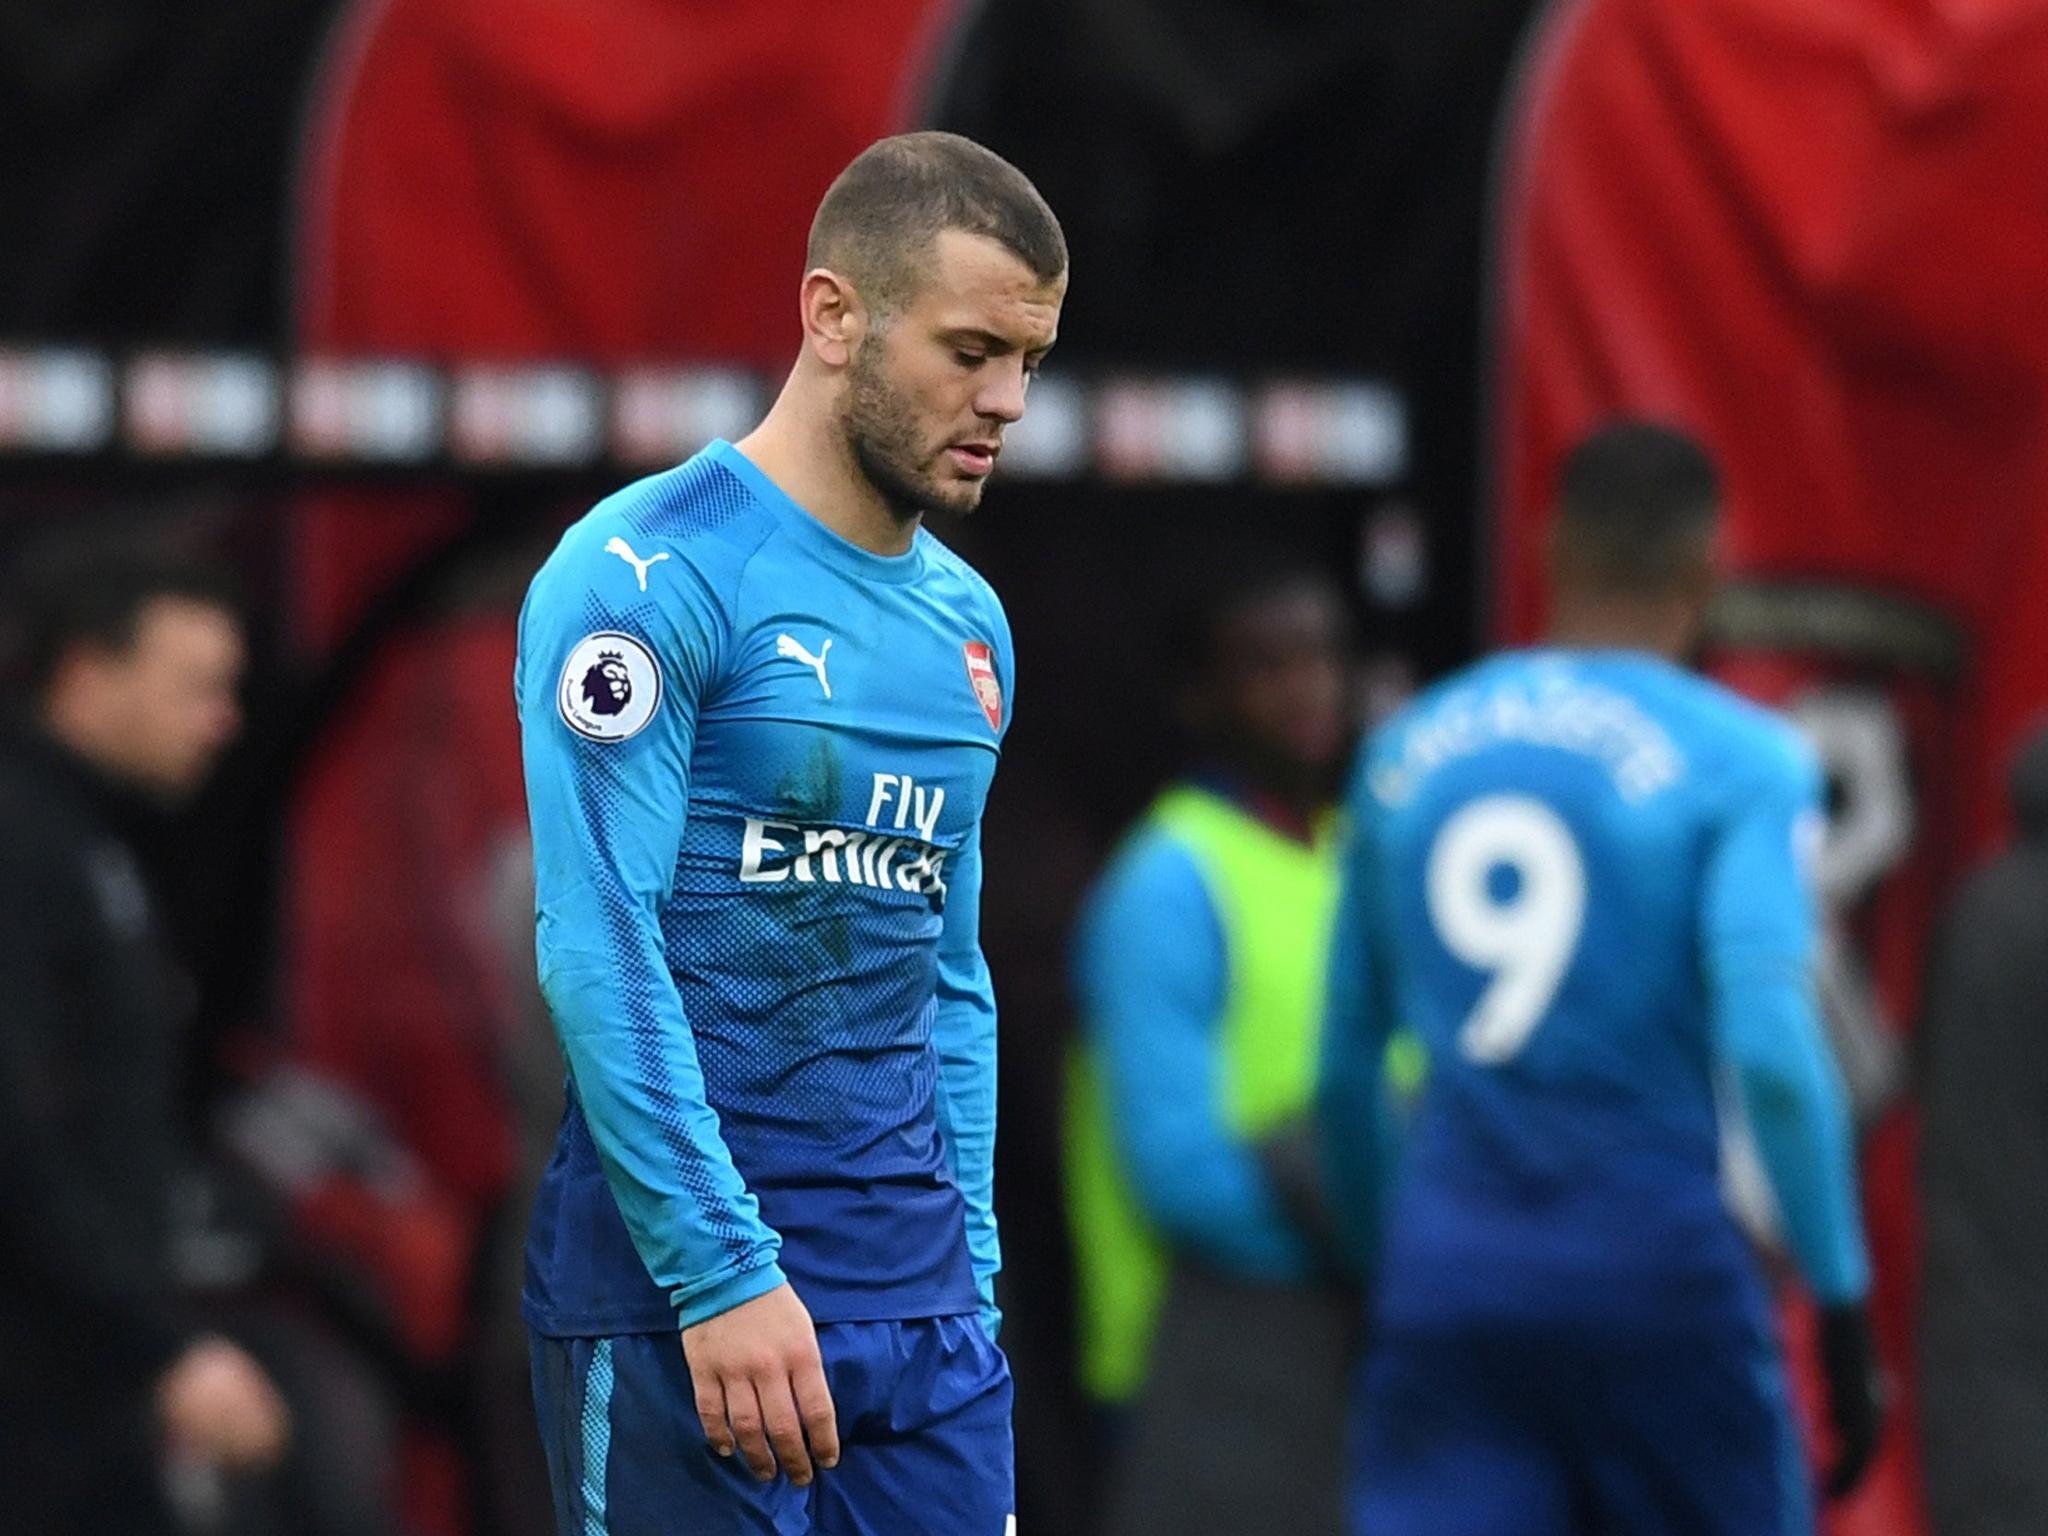 A dejected Jack Wilshere could do nothing to prevent Arsenal losing 2-1 at his former club Bournemouth